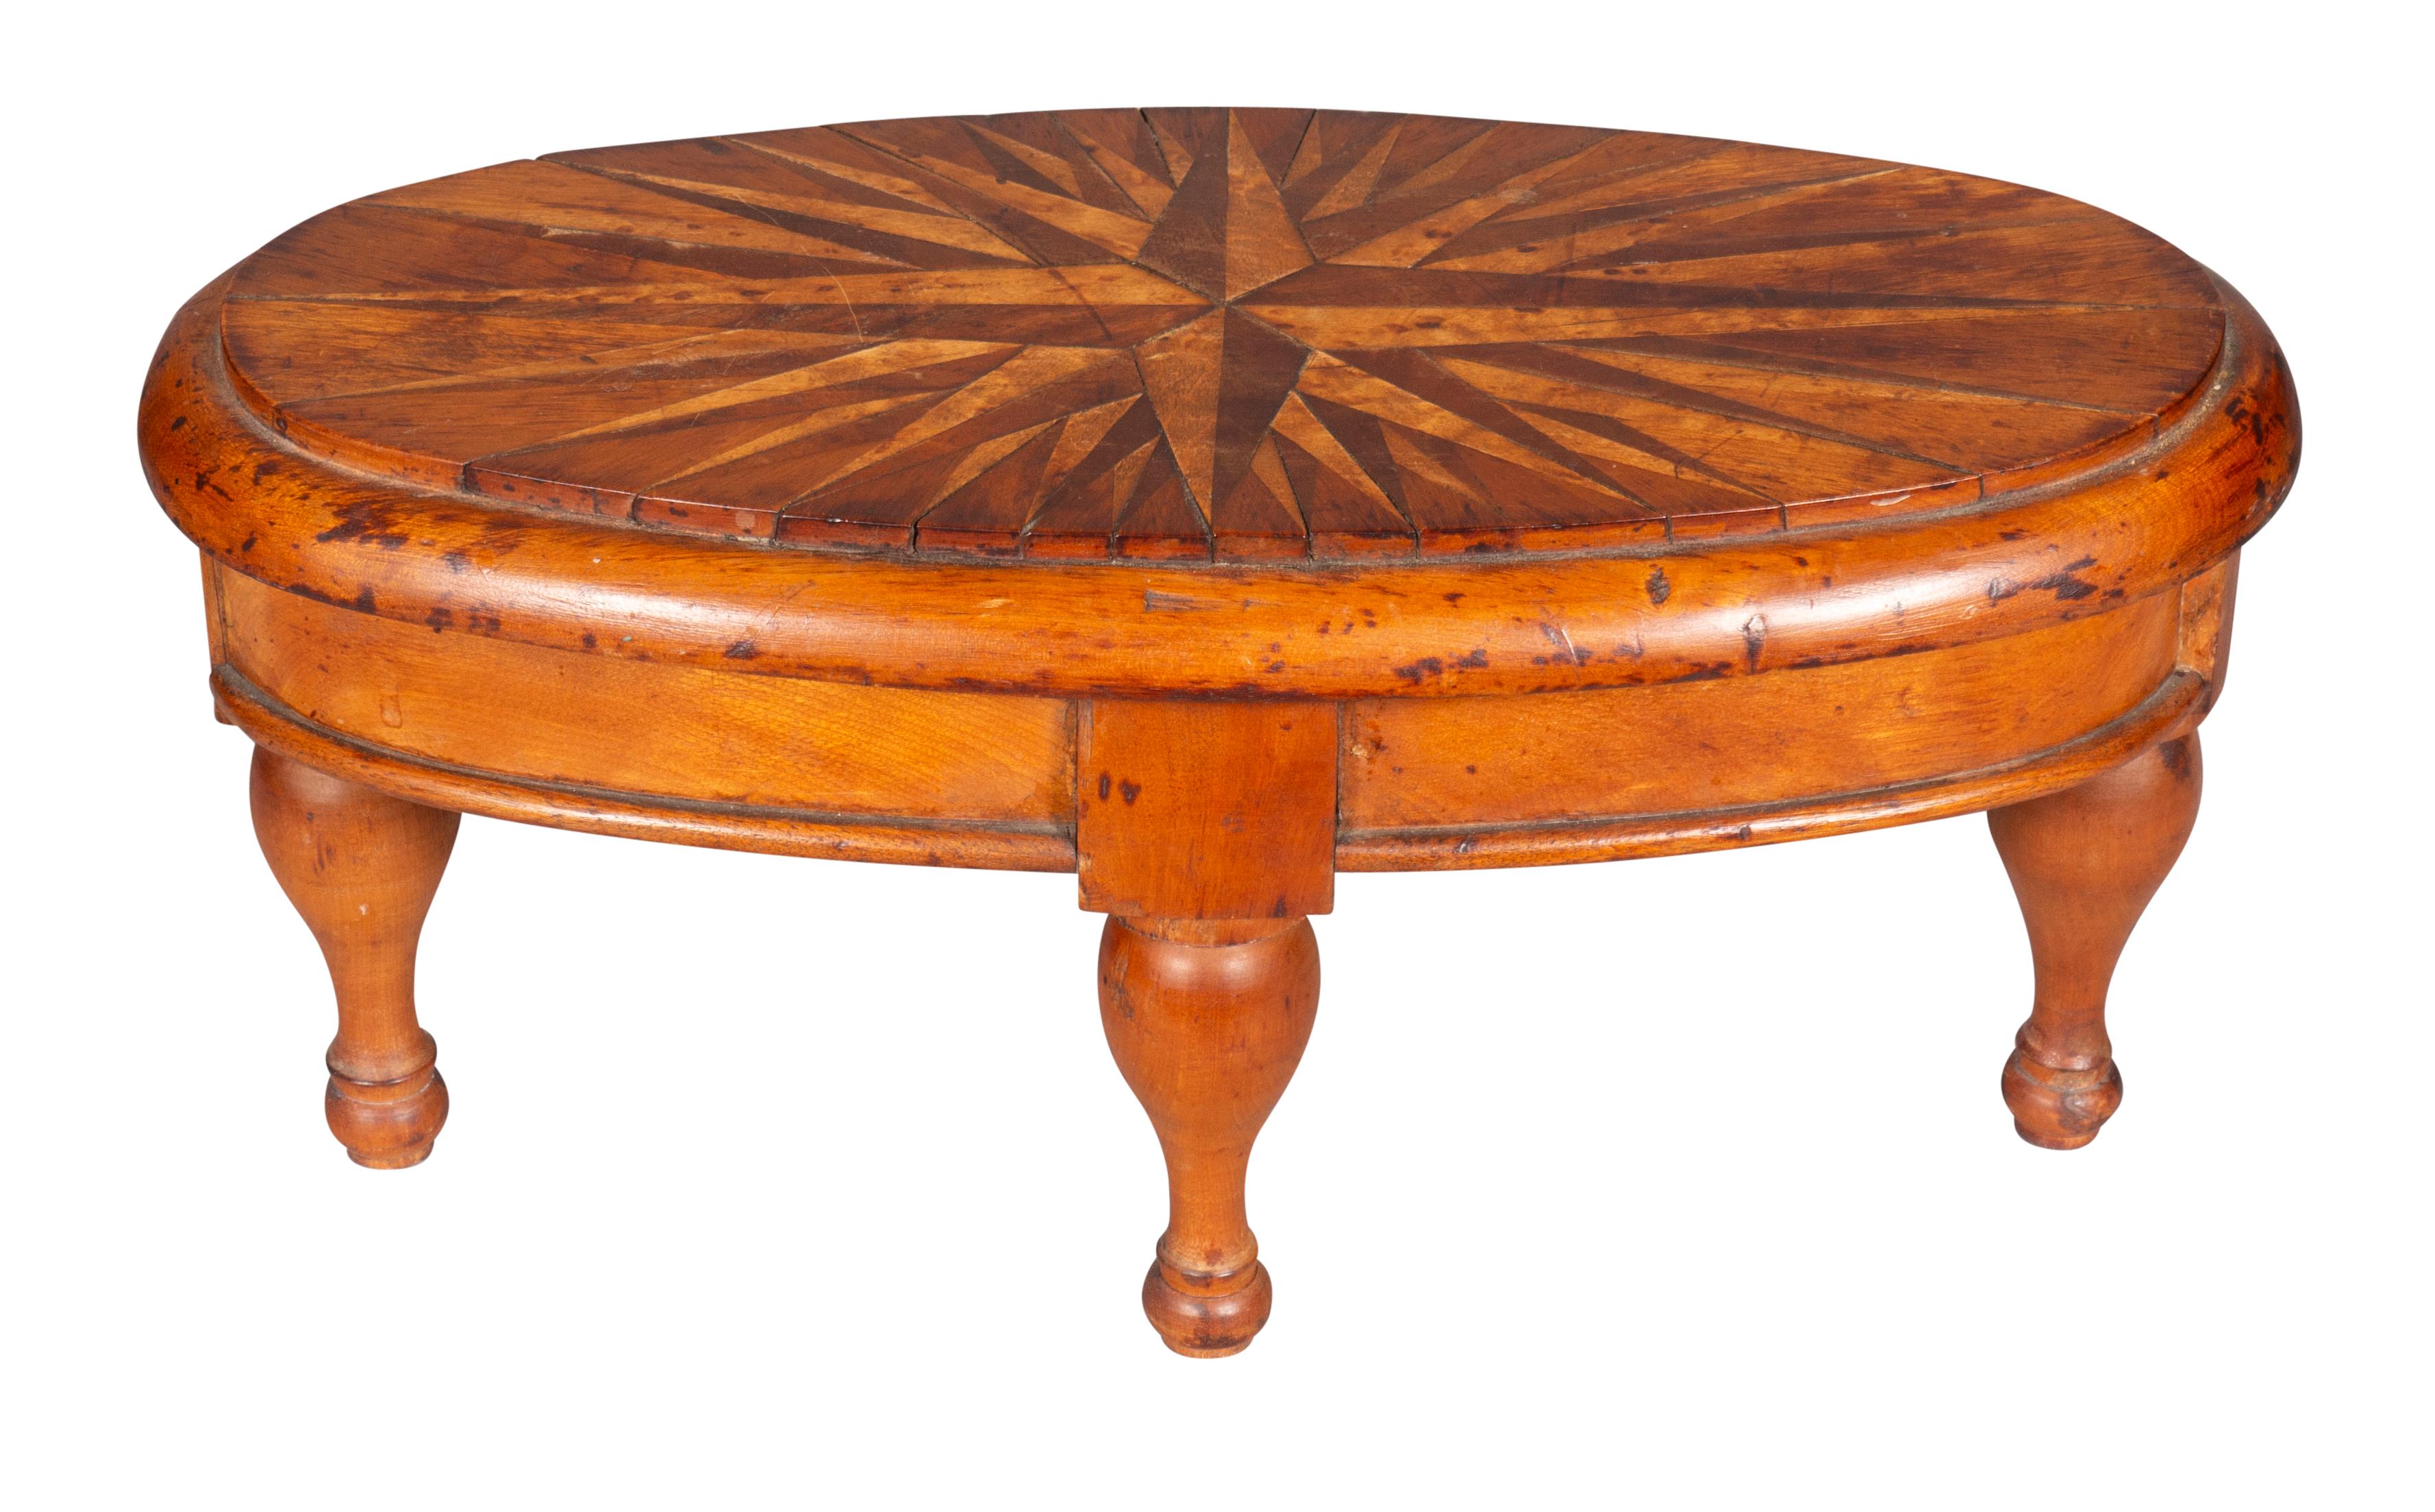 A nice table with oval top with compass inlay. Raised on turned legs.